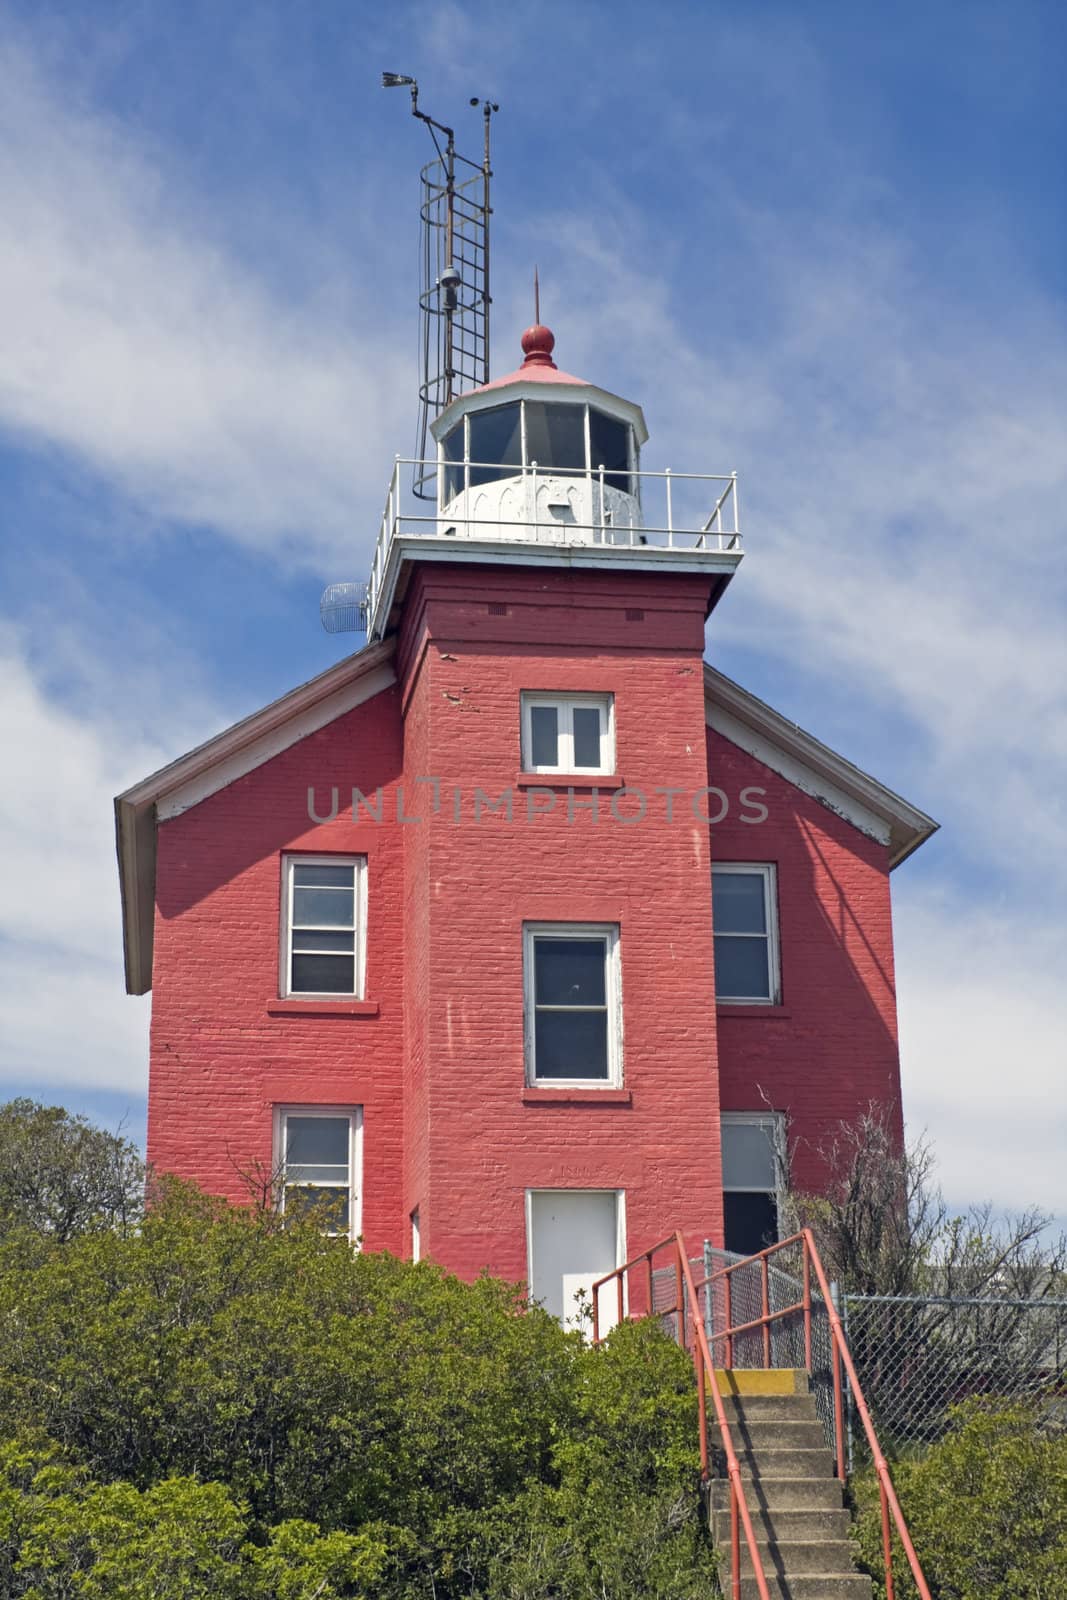 Marquette Harbor Lighthouse in Michigan